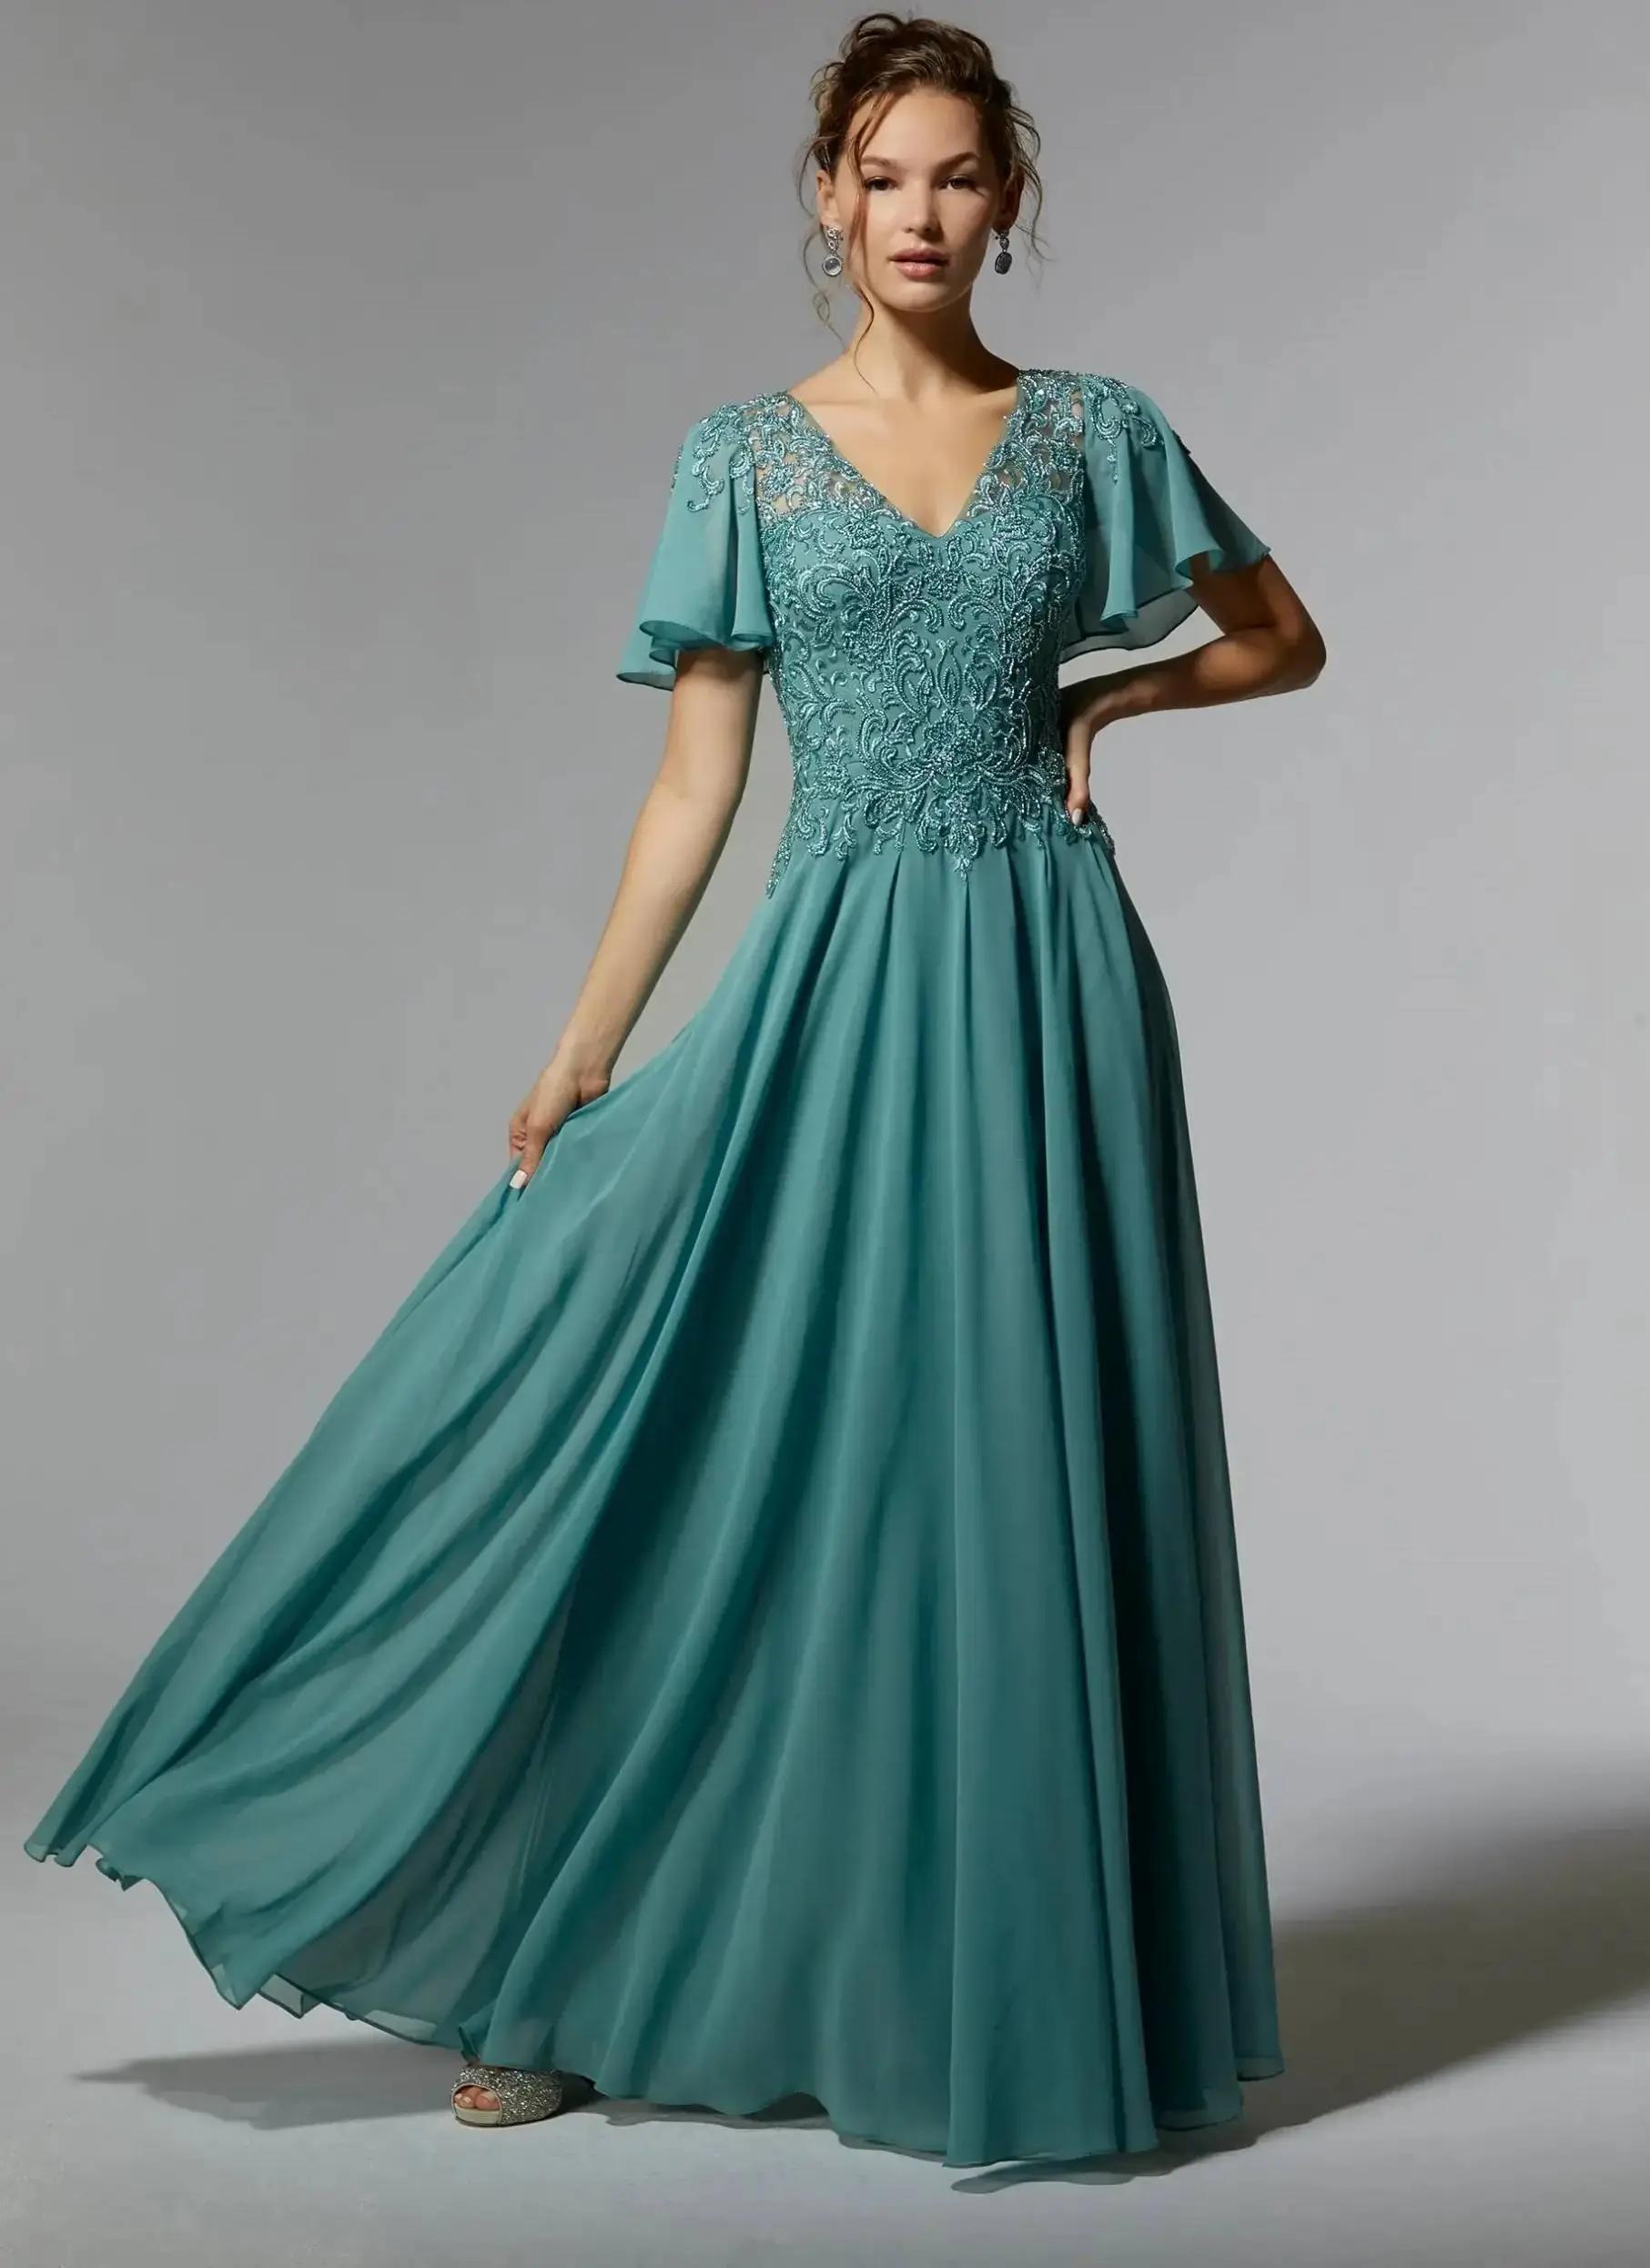 Preview the Latest Trends in Evening Wear at Kay&#39;s Kreations MGNY 2024 Trunk Show Image